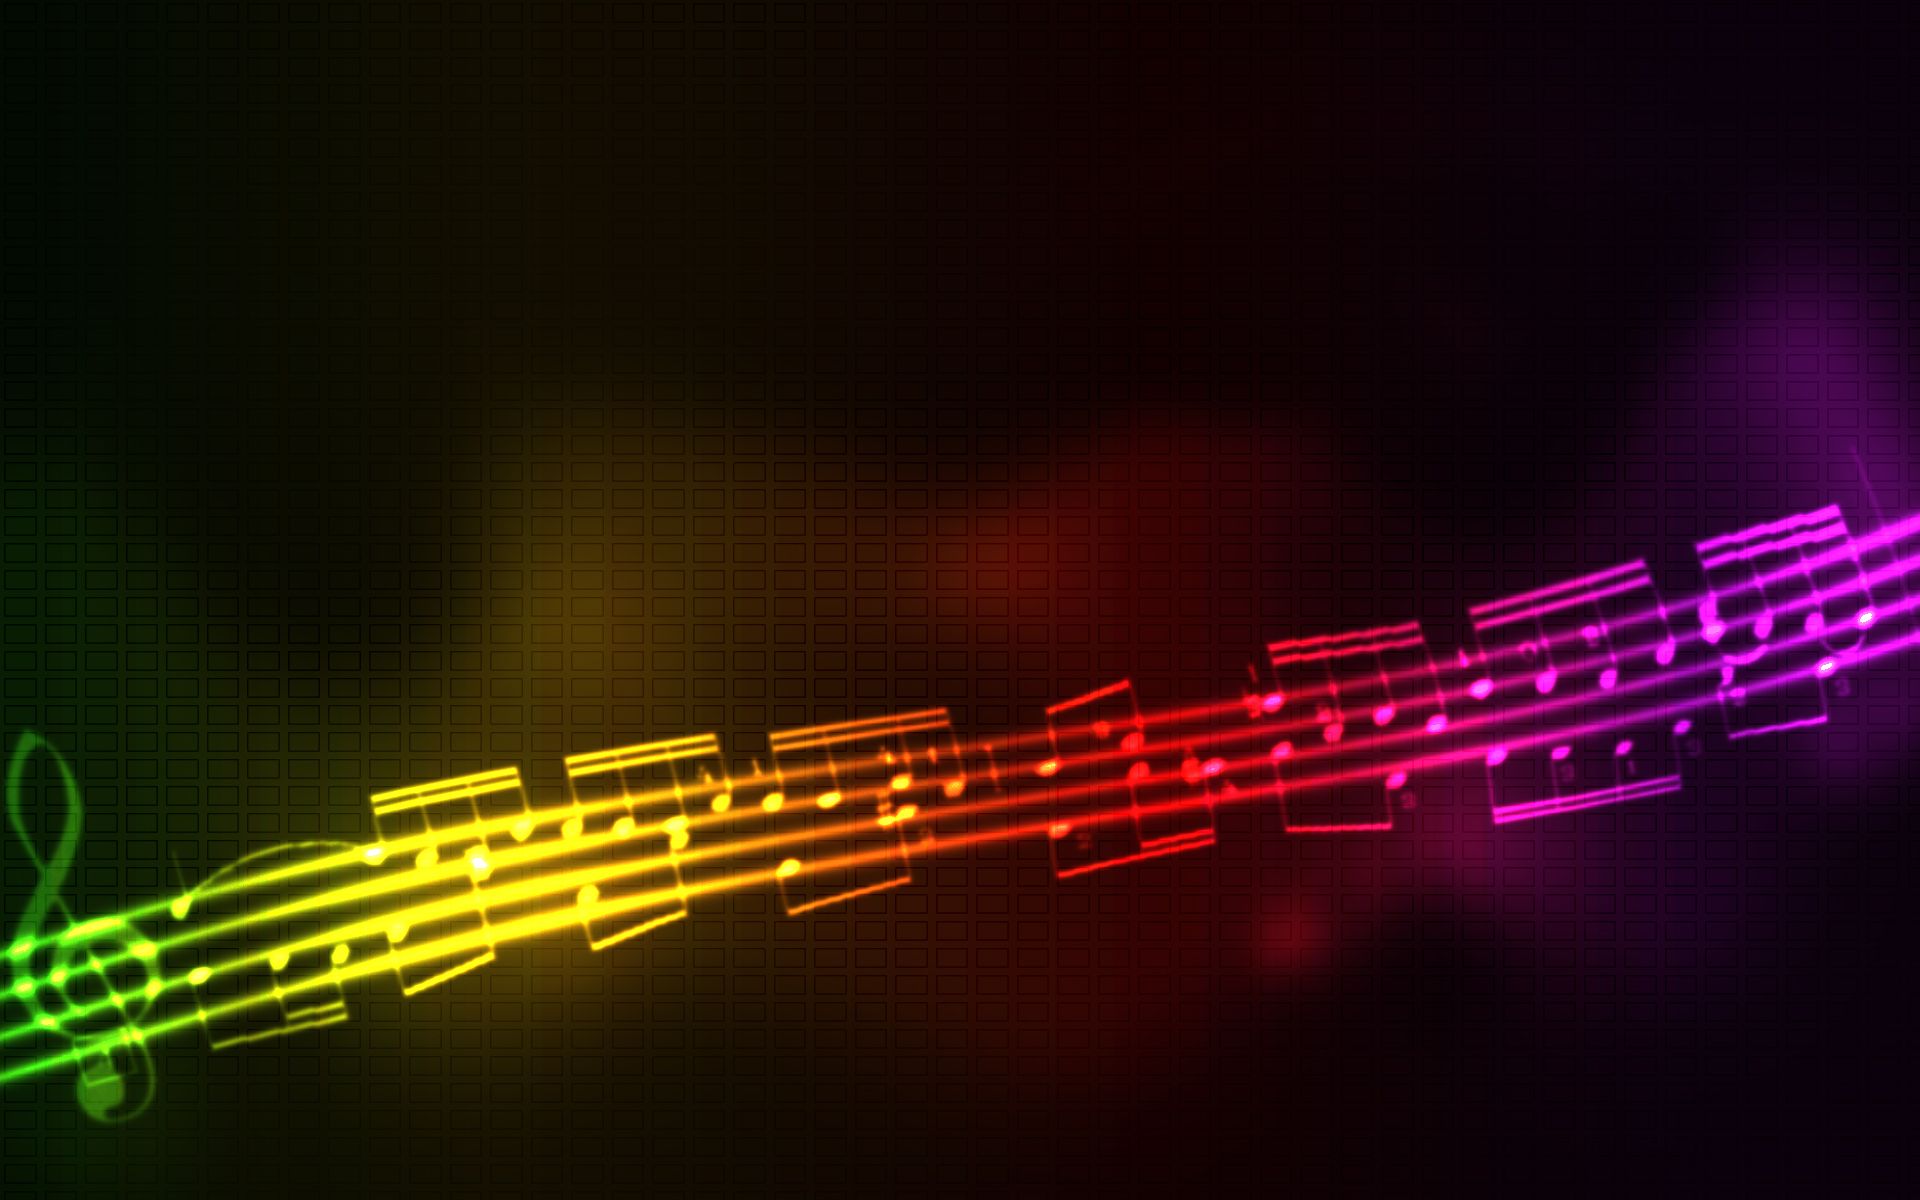 Lorful music notes abstract wallpaper deskto wallpaper artistic wallpaper music backgrounds high resolution wallpapers